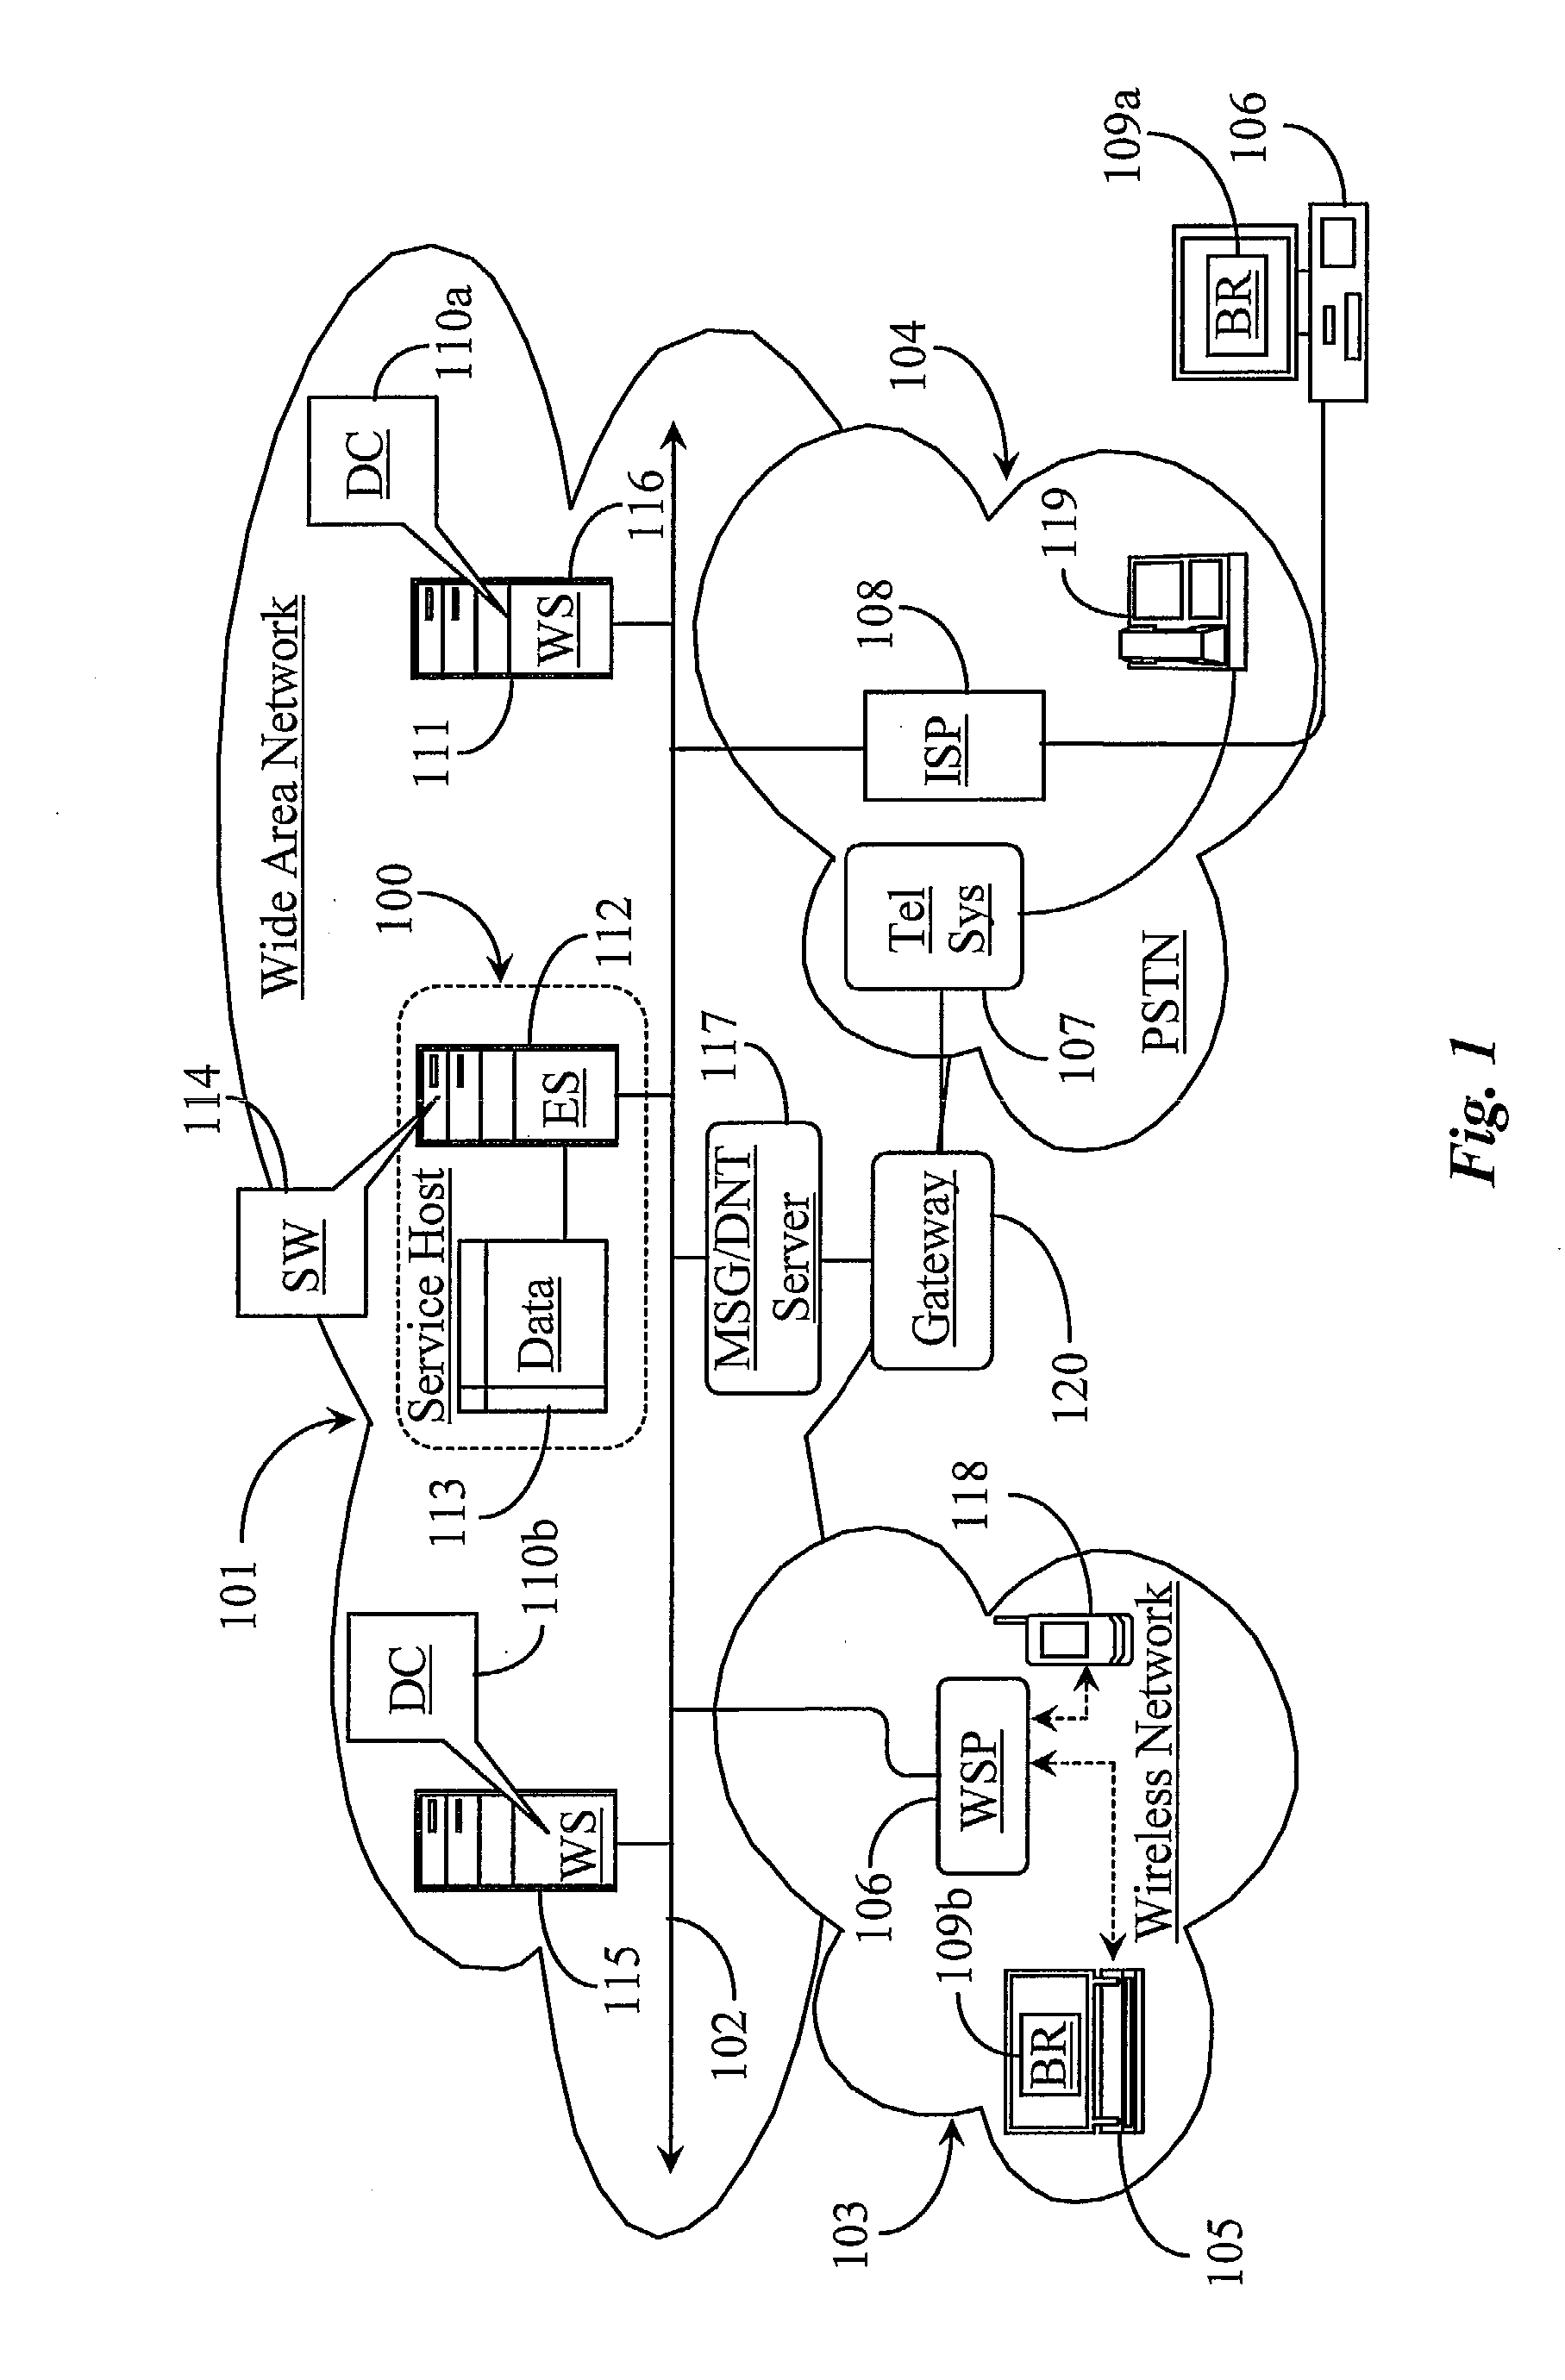 Server-Client Interaction and Information Management System